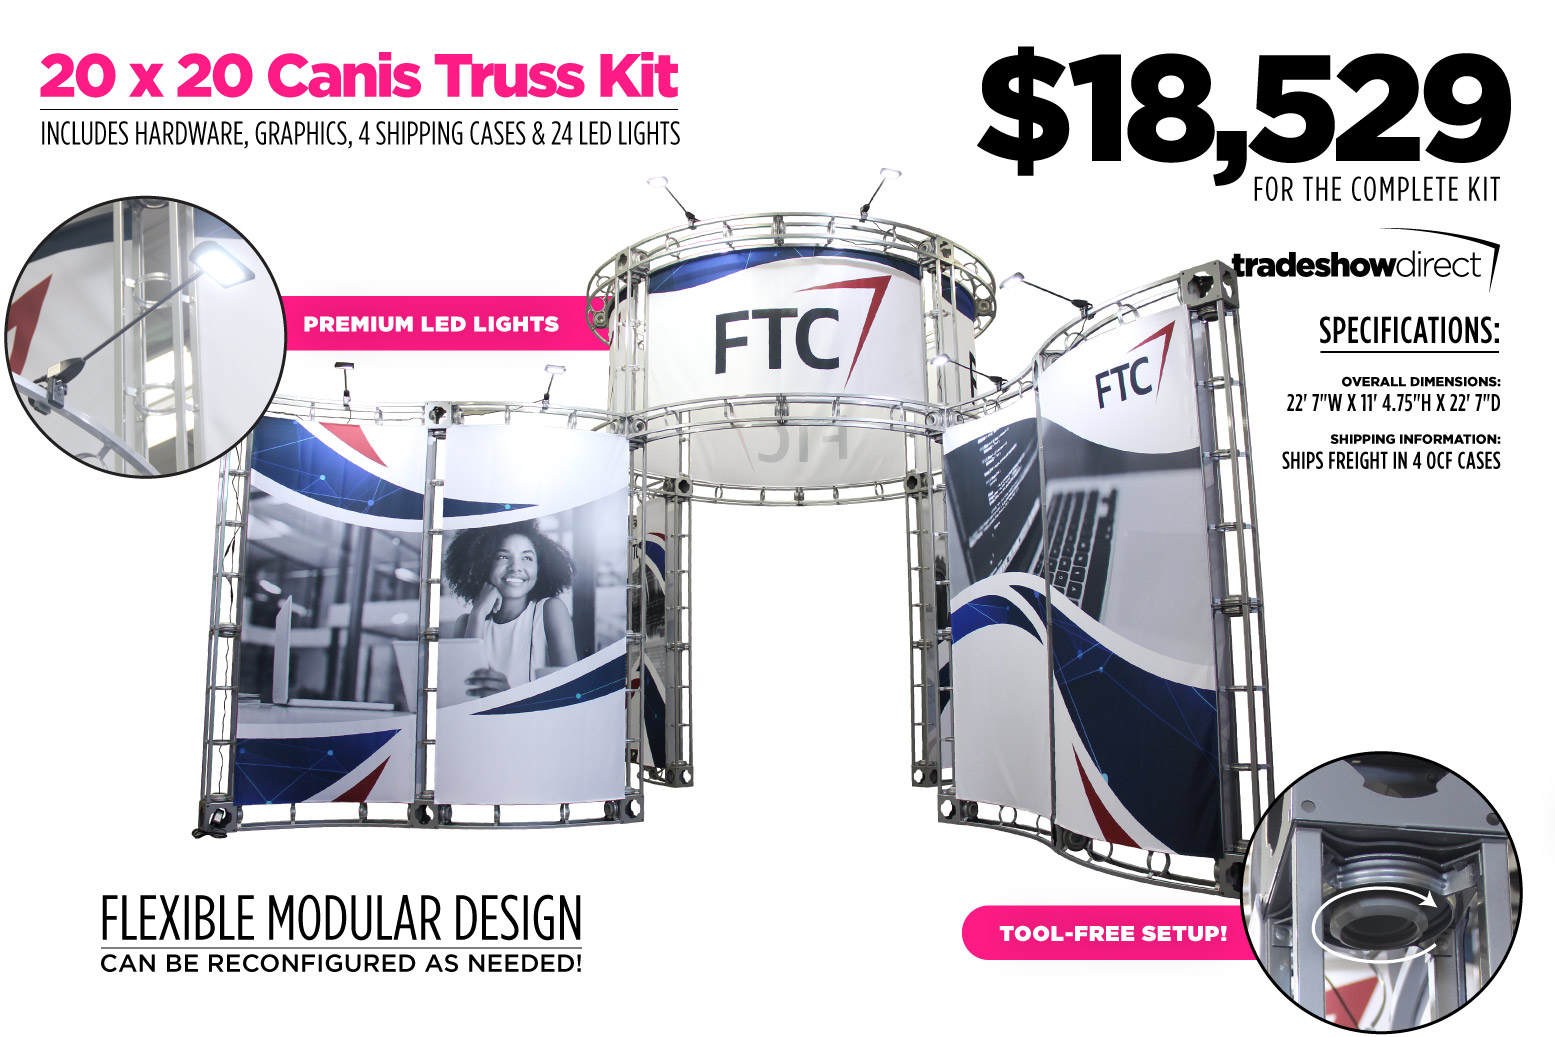 20 x 20 Canis Truss Banner Ad